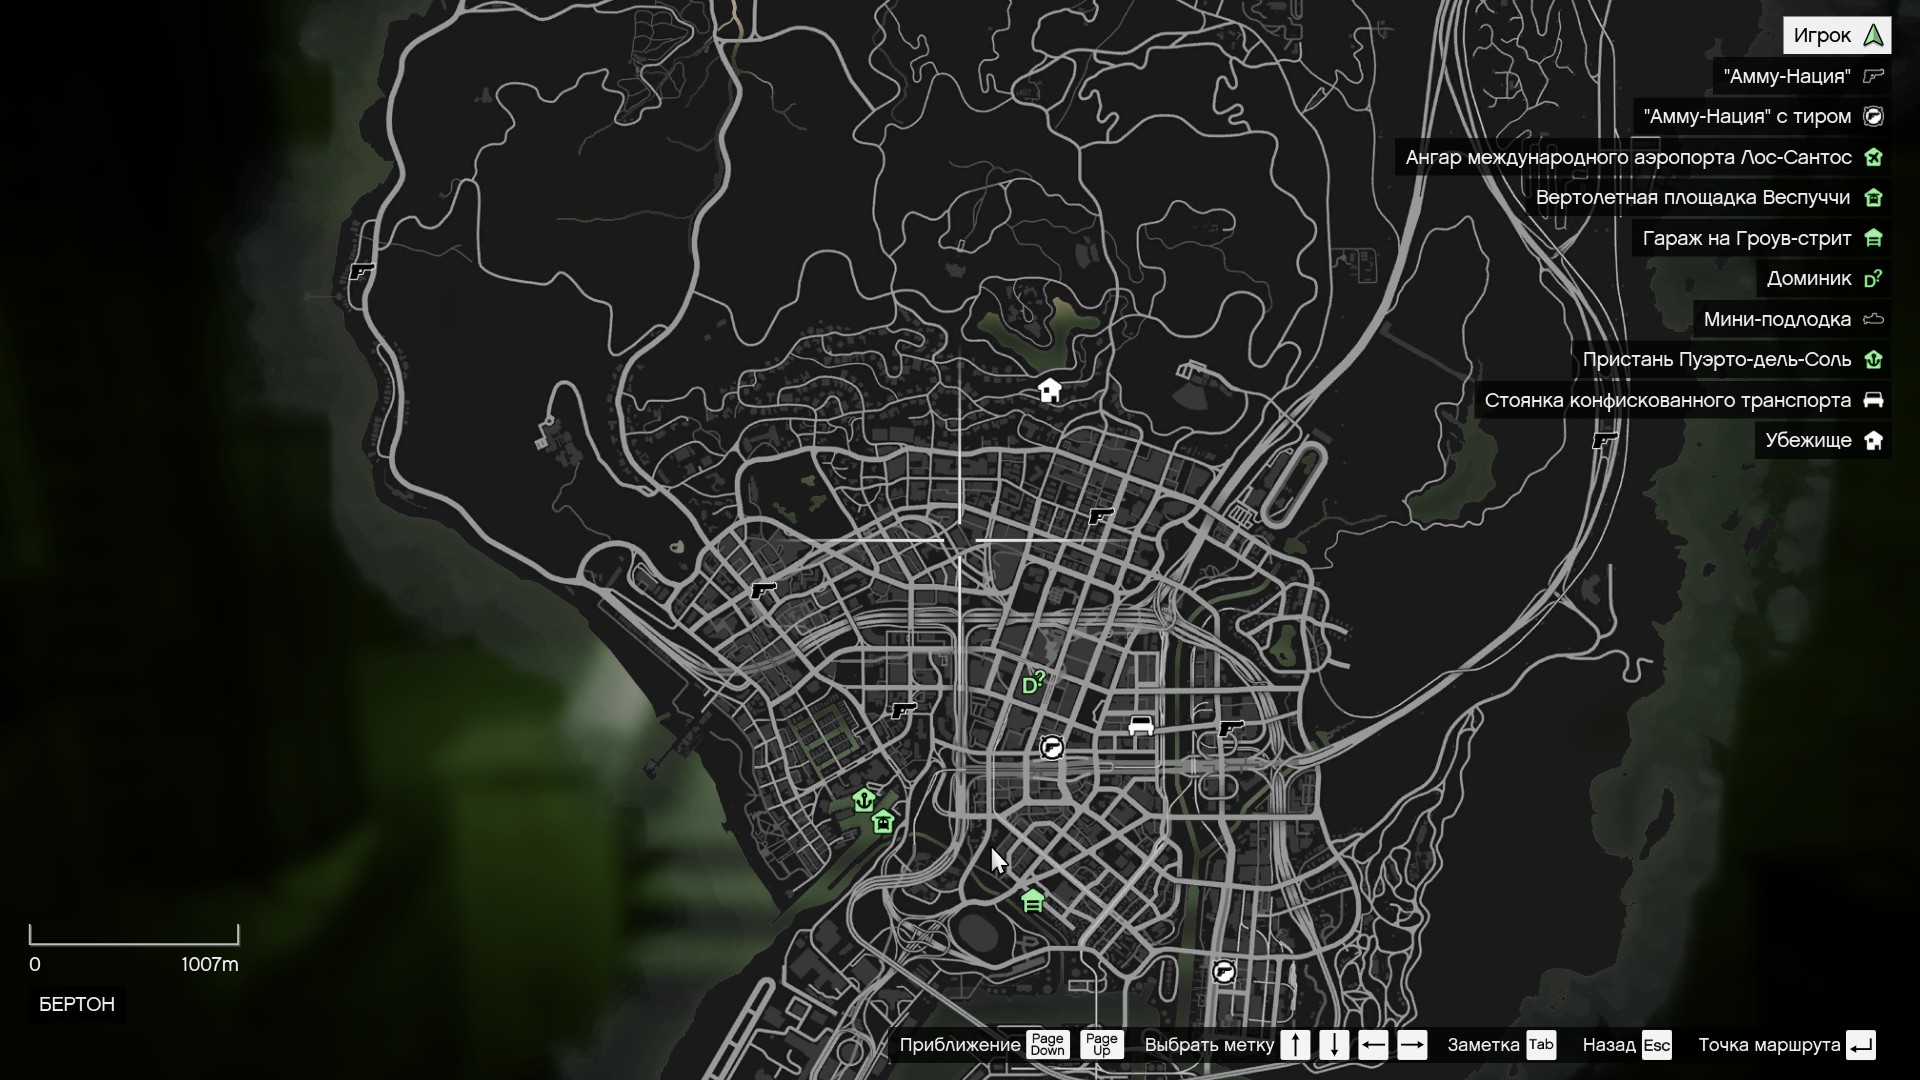 Grand Theft Auto V Completion Guide - Playthrough - Collect 50 pieces of a spaceship, 2 part - 7562177